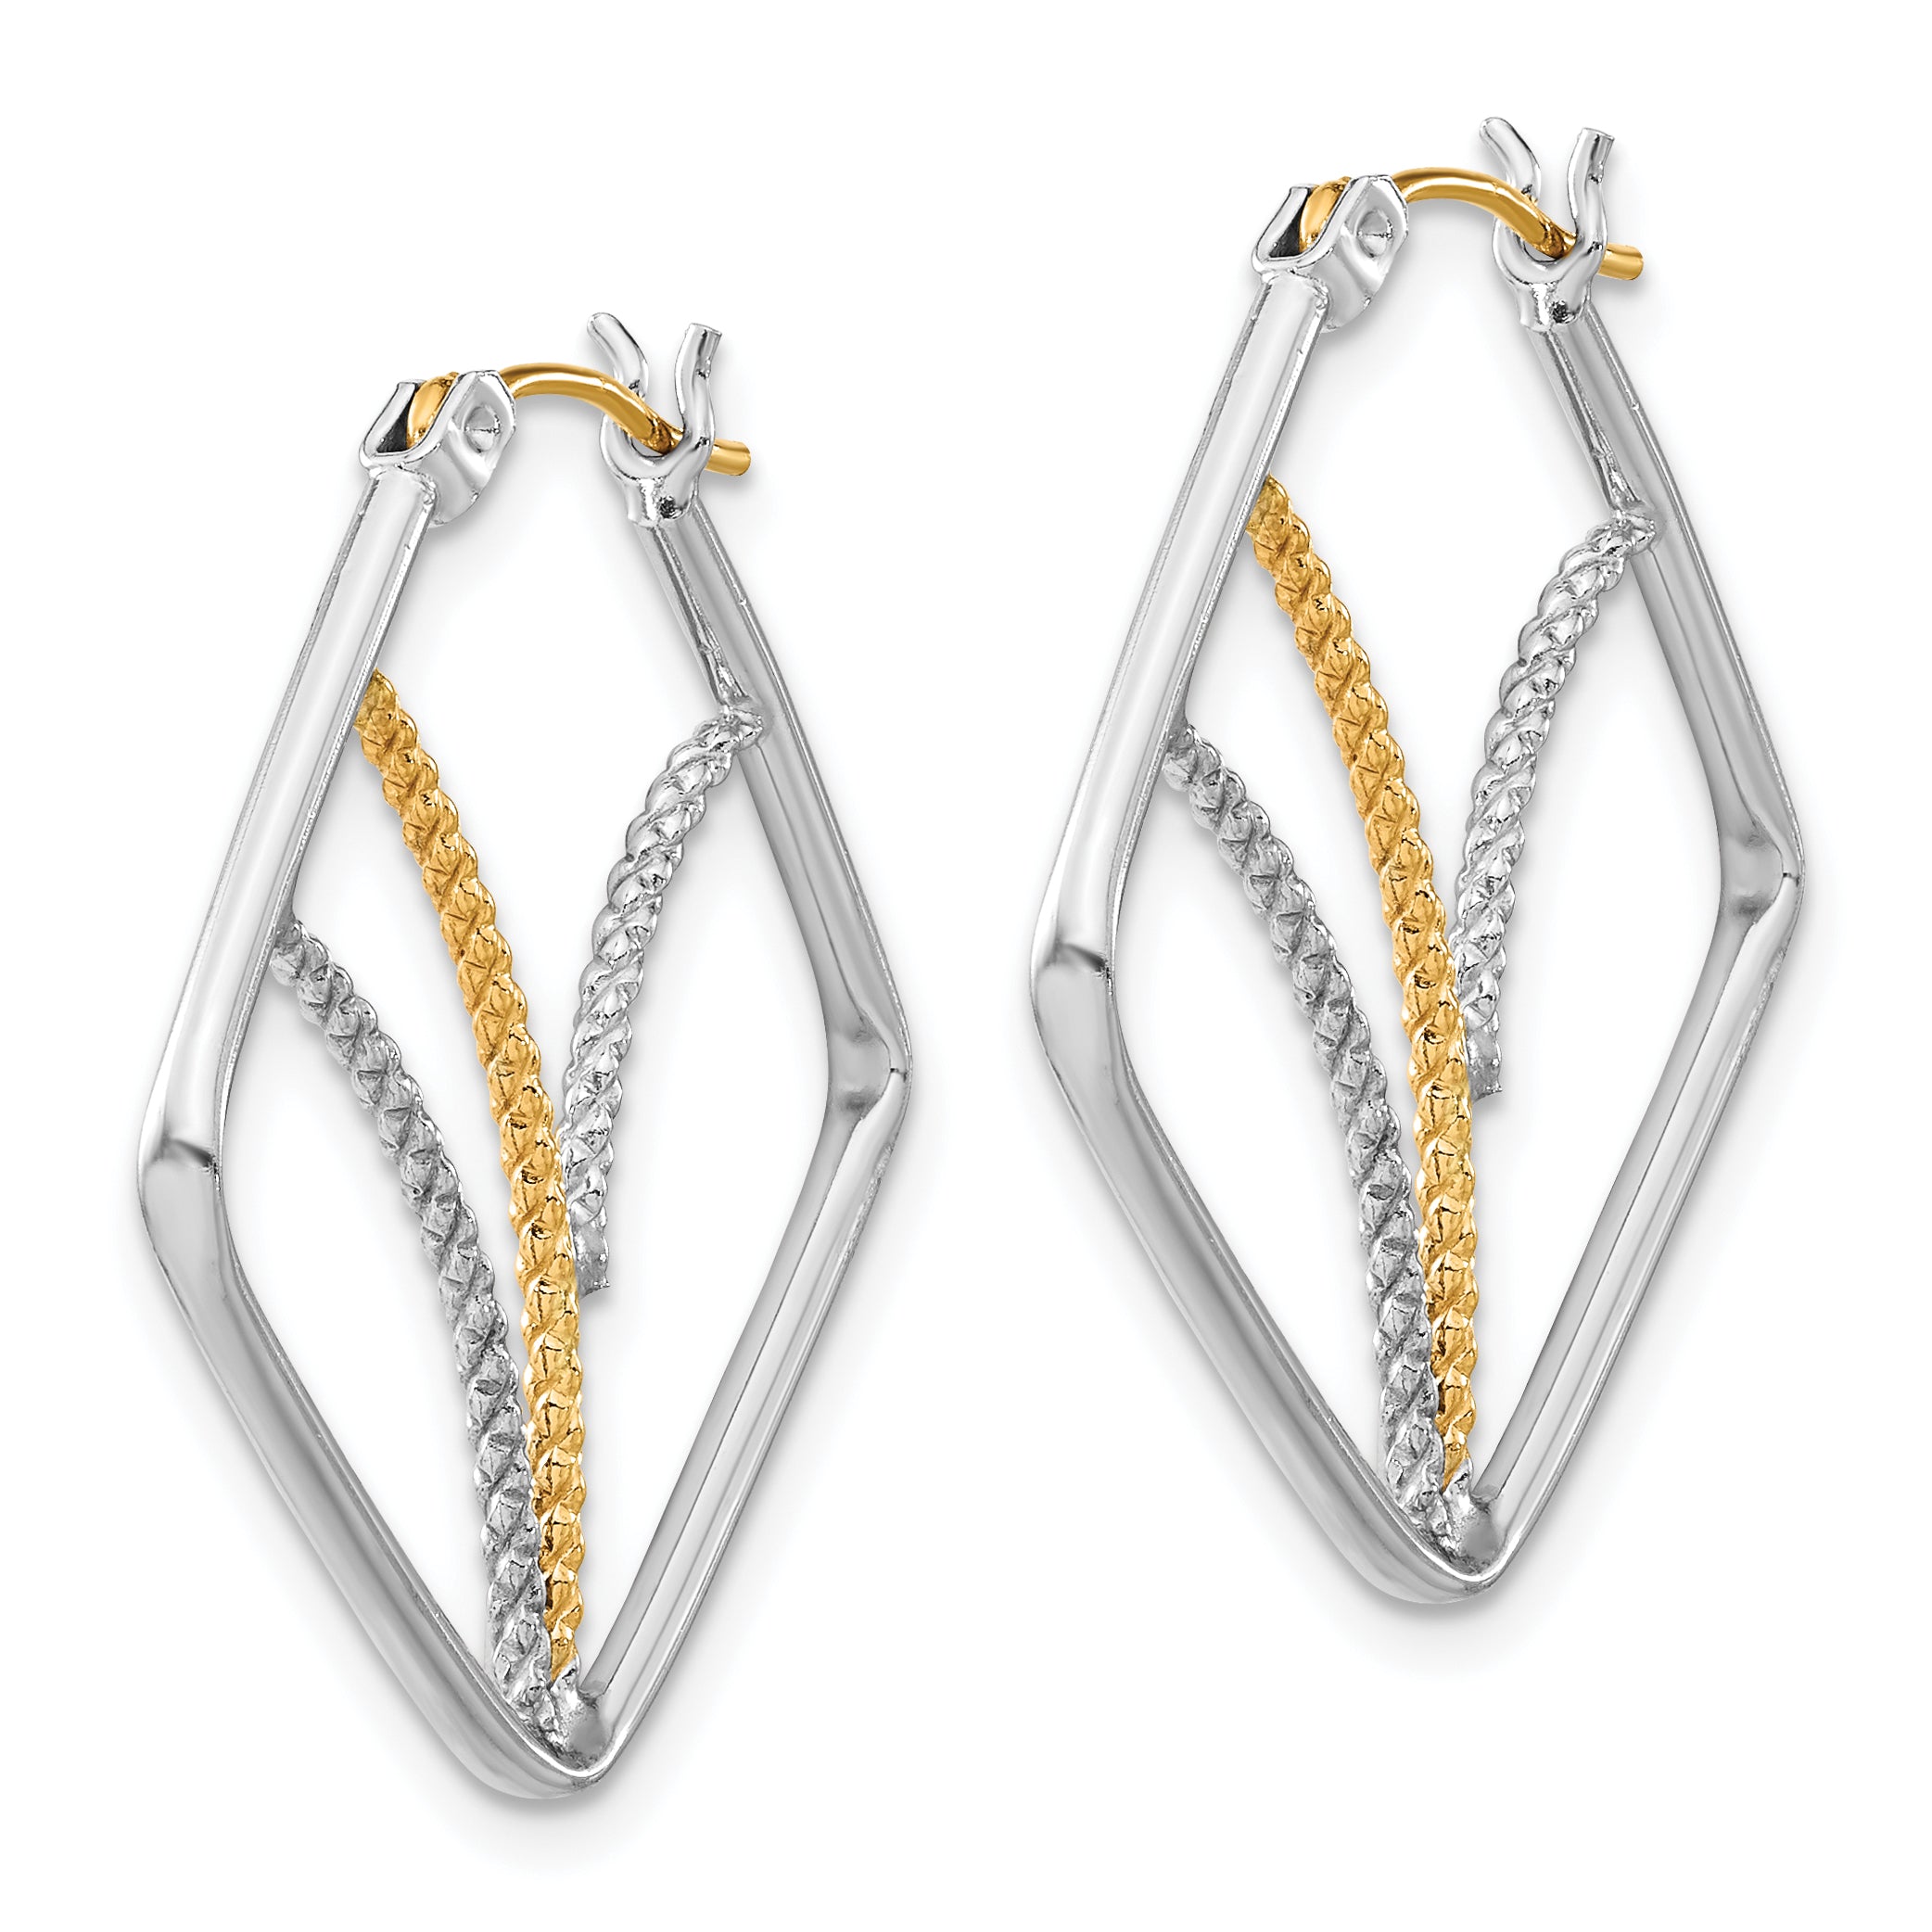 Sterling Silver w/14k Gold-plated Polished Twisted Squares Hoop Earrings